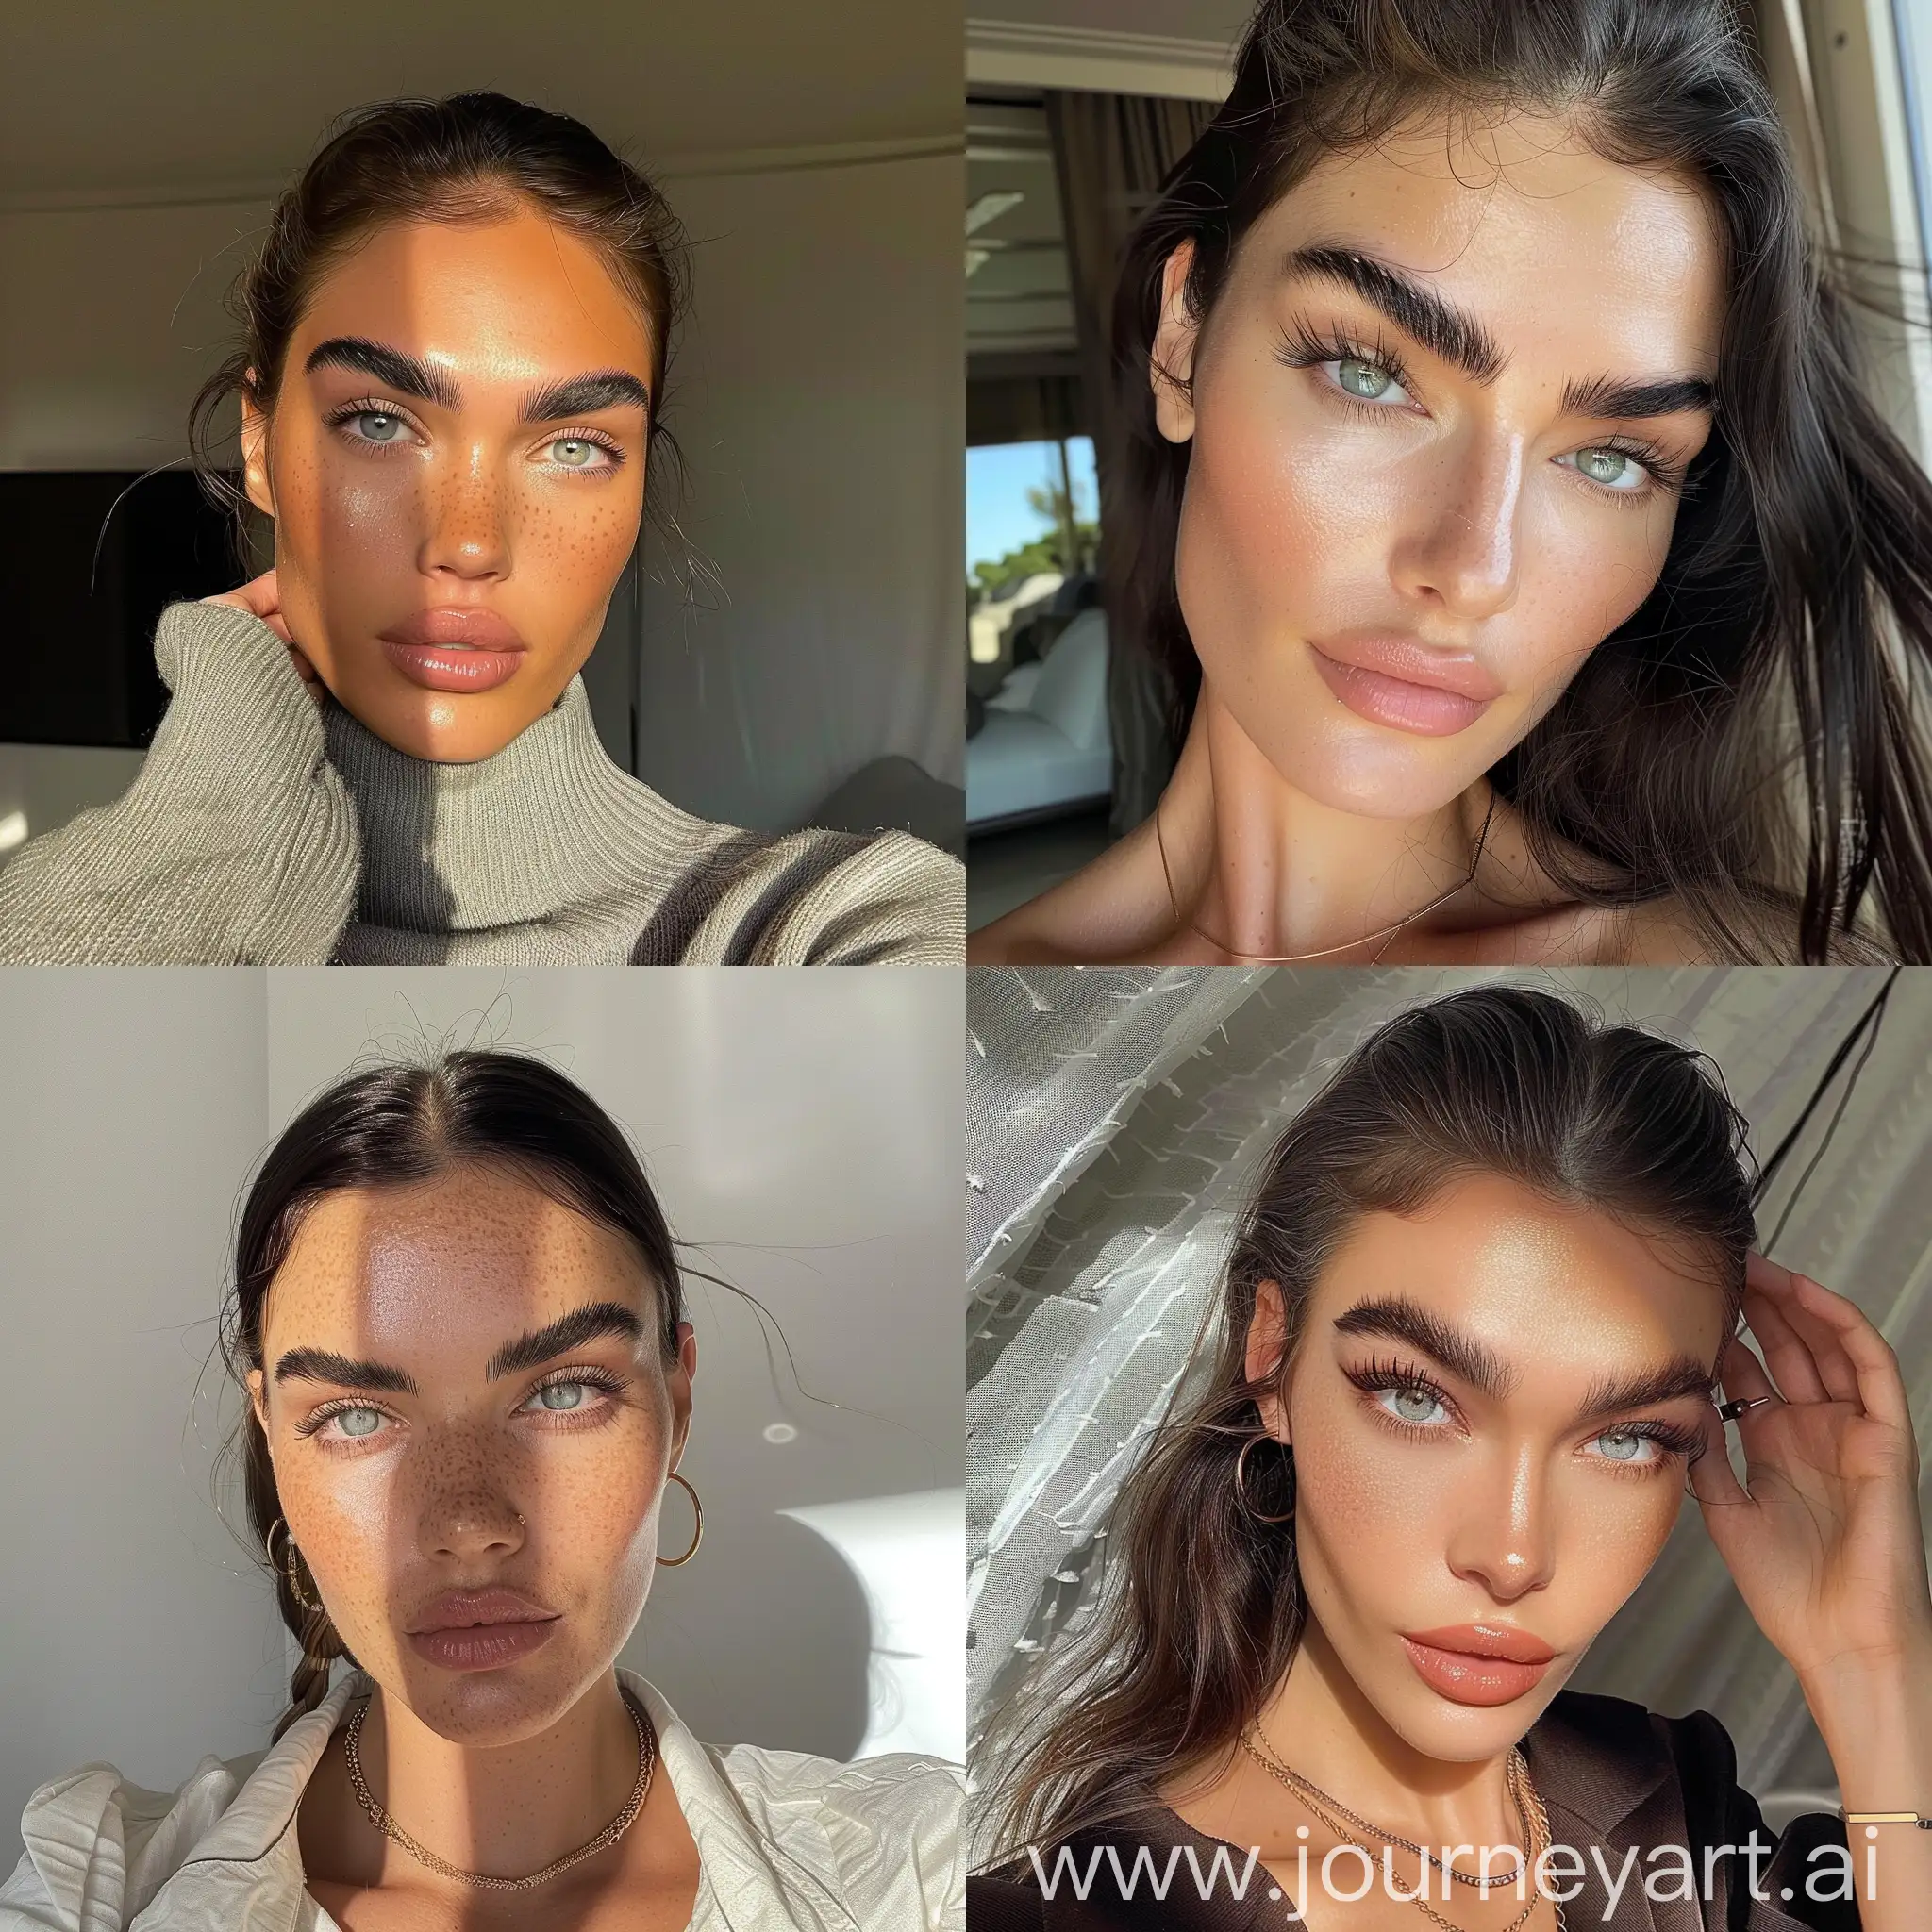 Aesthetic Instagram selfie of a female super model with two heads, gorgeous, bushy eyebrows